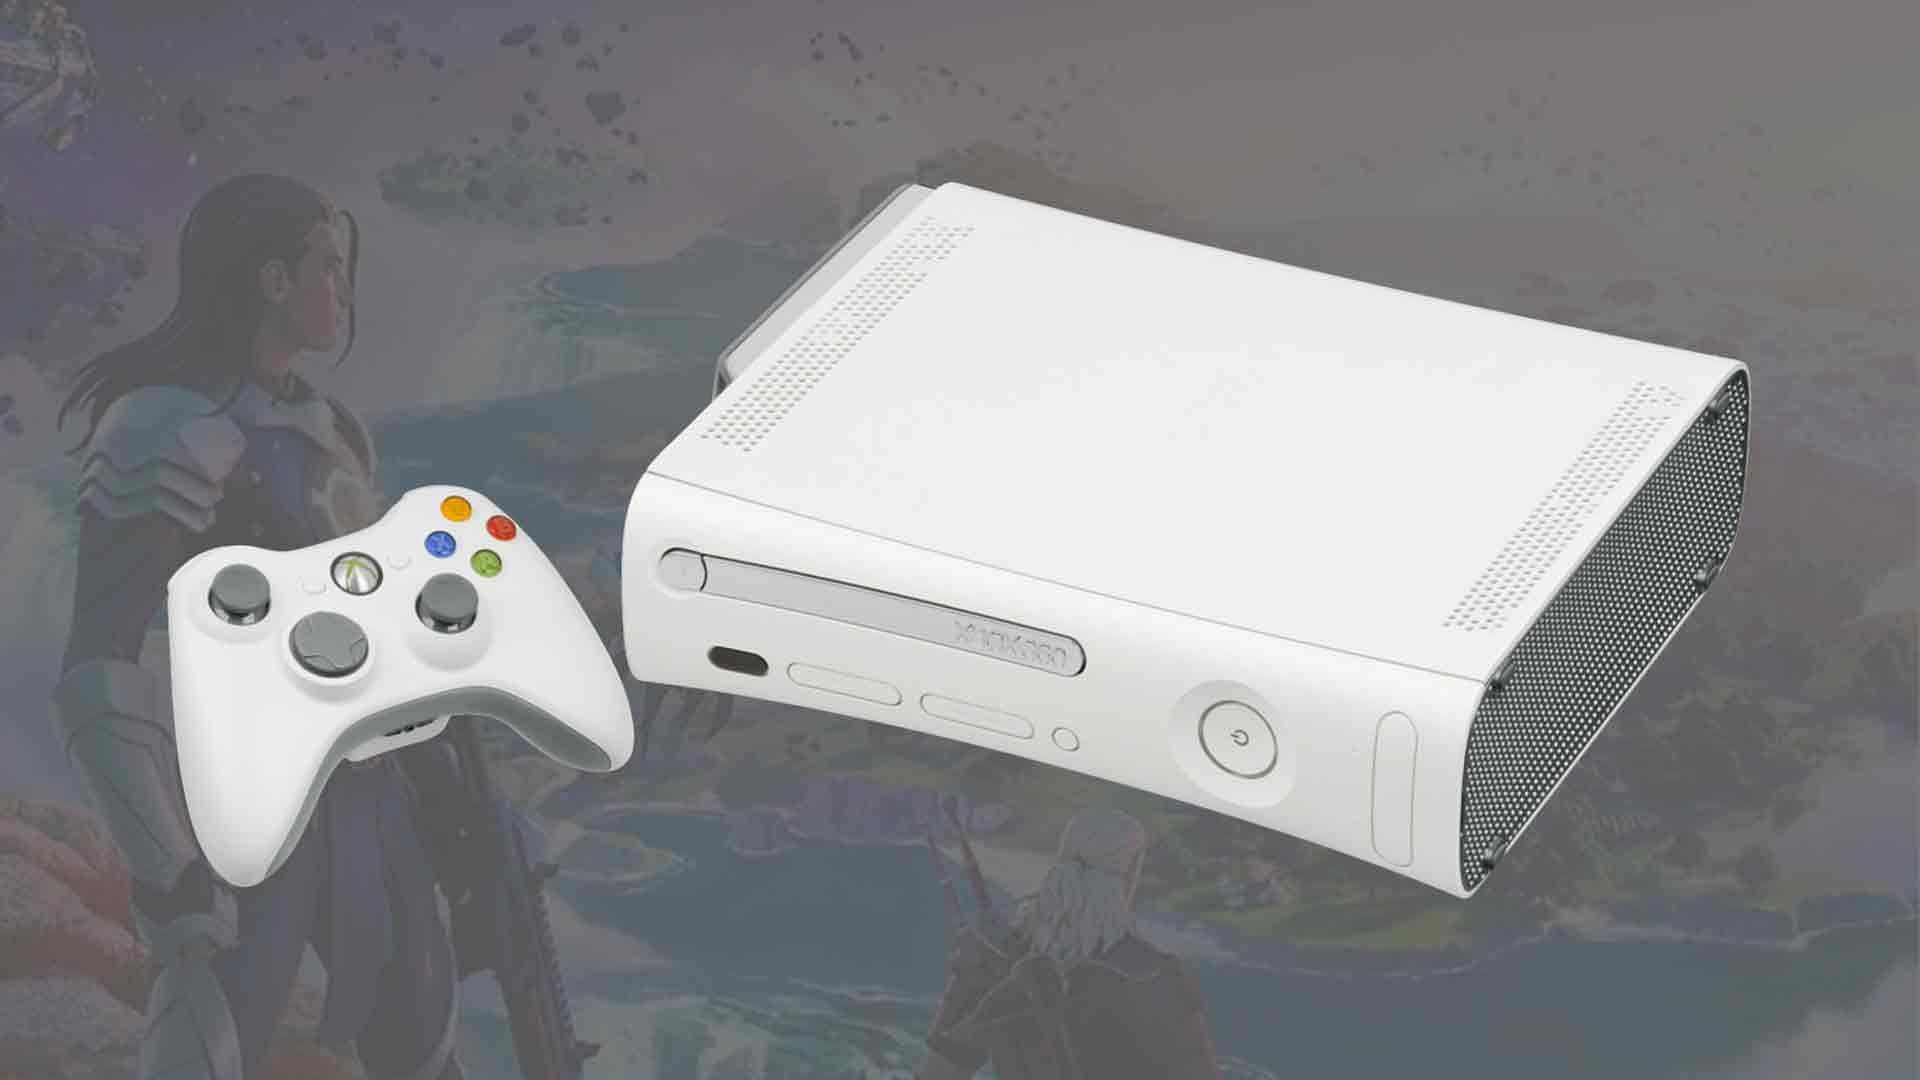 I Bought An Xbox 360 In 2022 - Here's Why! 